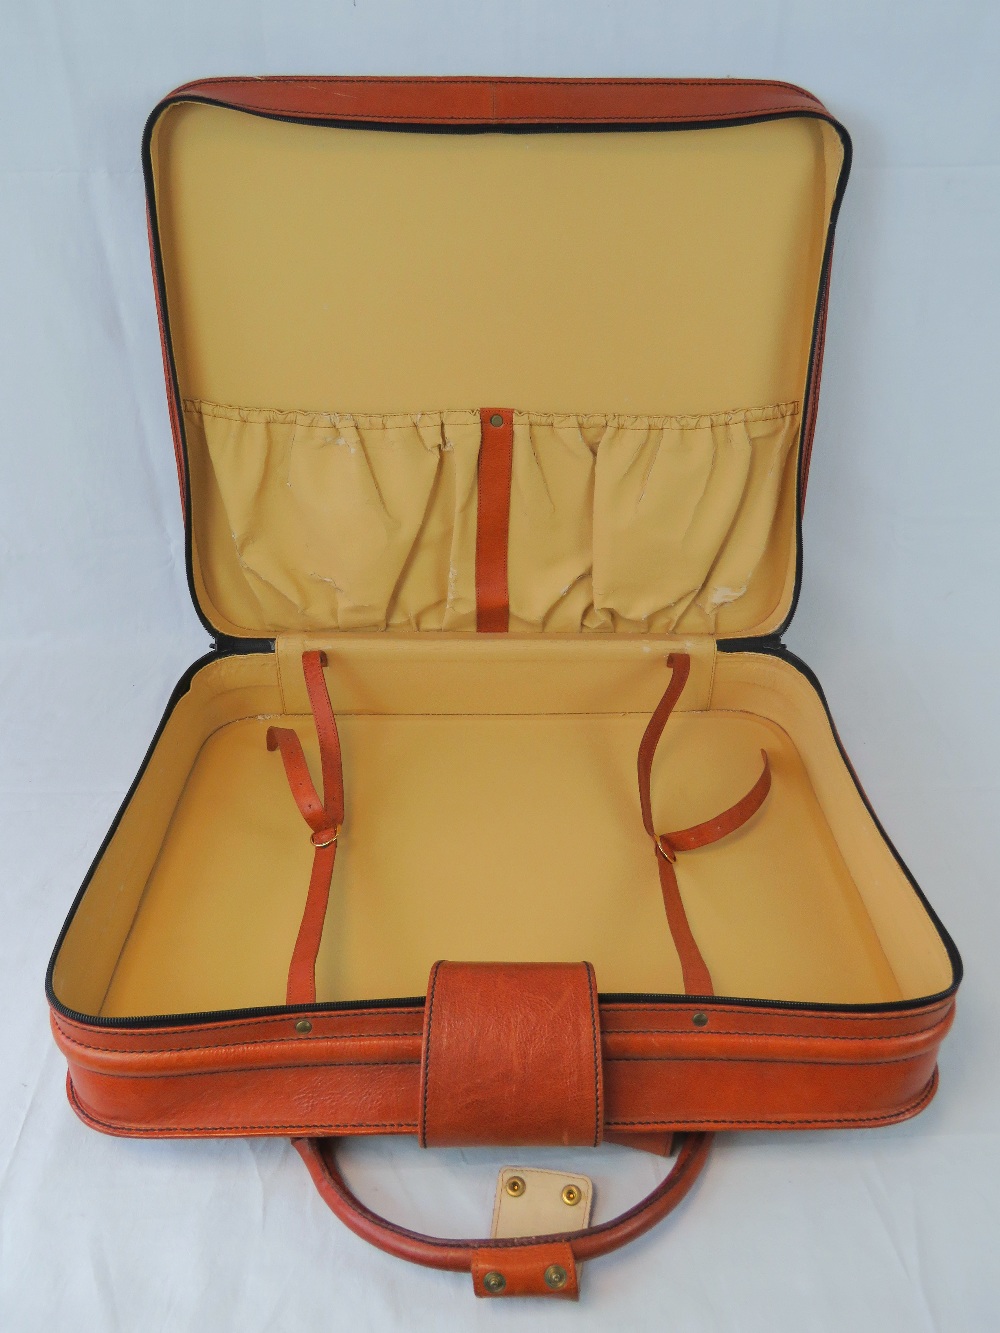 Ferrari Testarossa luggage set by Schedoni including; holdall, two suitcases, briefcase, - Image 10 of 11